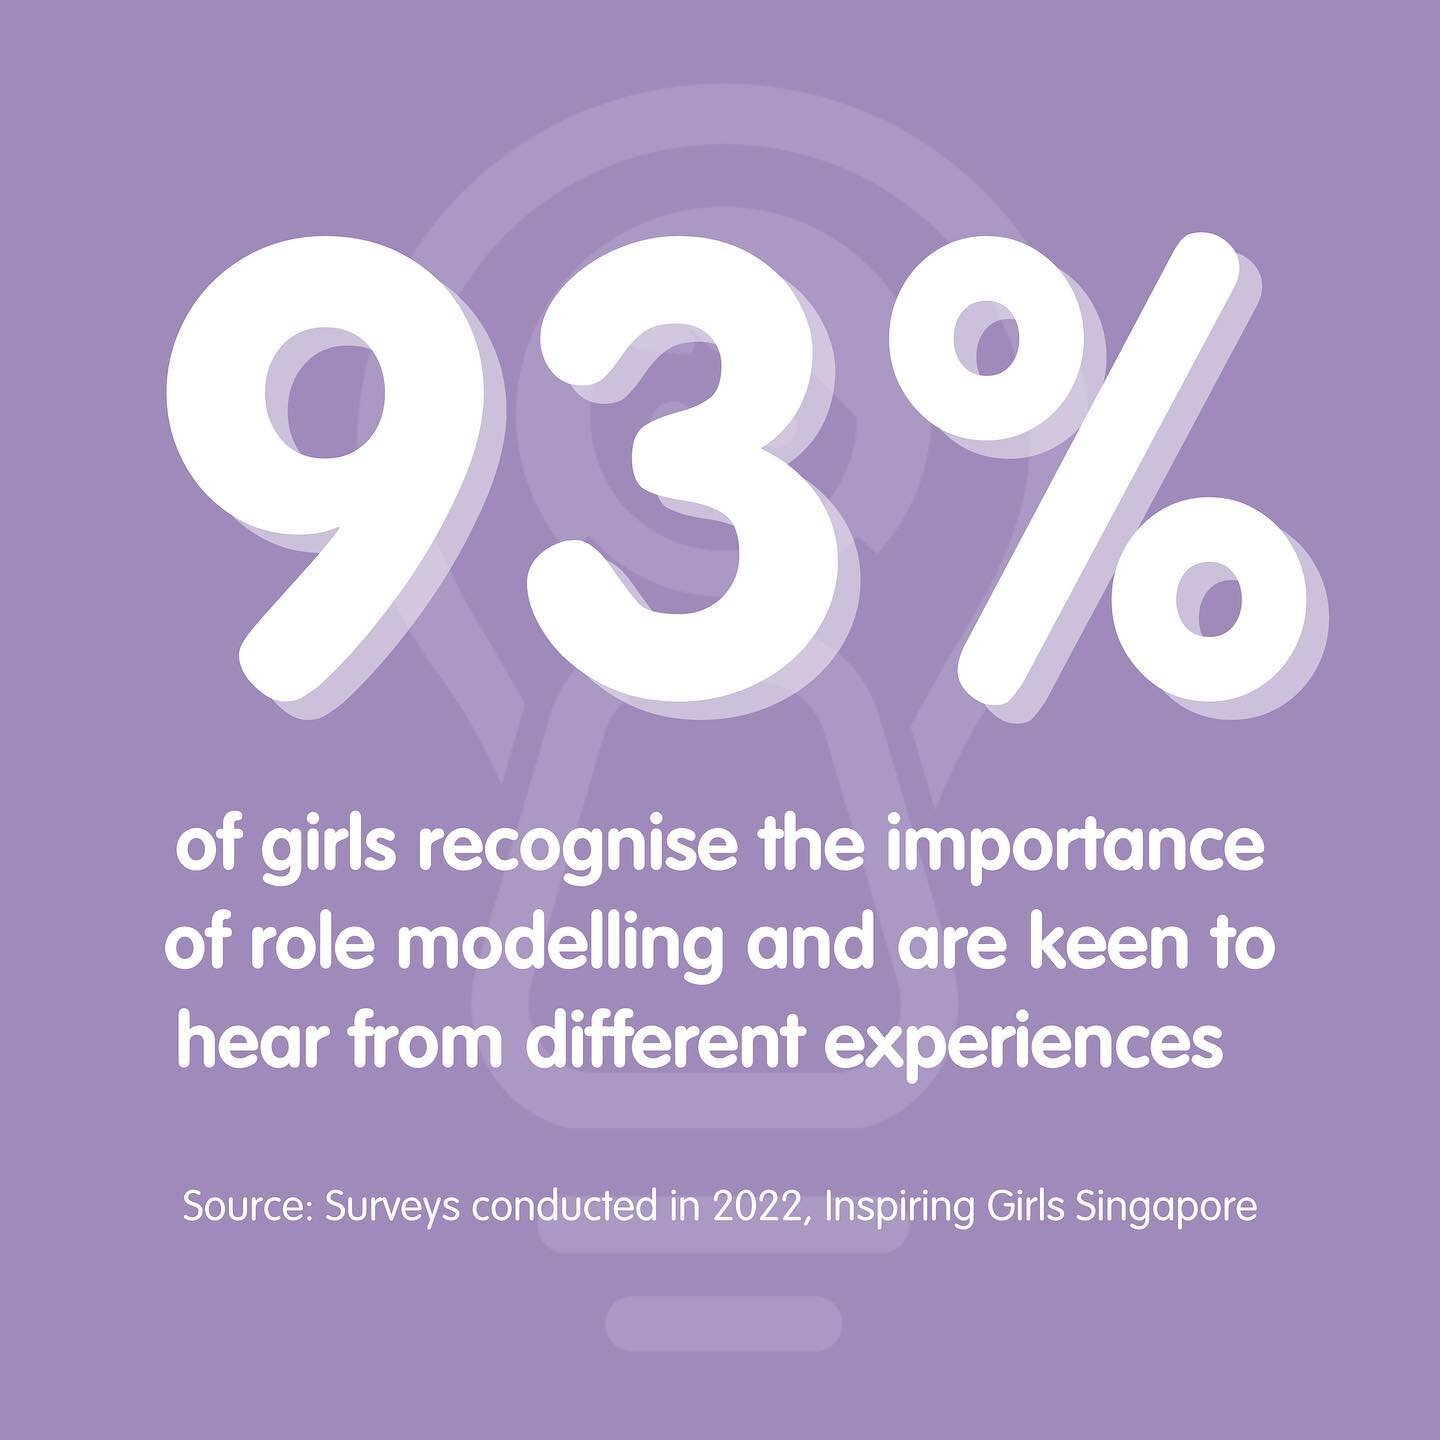 The power of role modelling 👆

Though our surveys, we found that exposing girls to positive and relatable role models had such a profound impact on them! Post-event, 95% of them felt happier, and 93% now recognise the importance of role modelling an